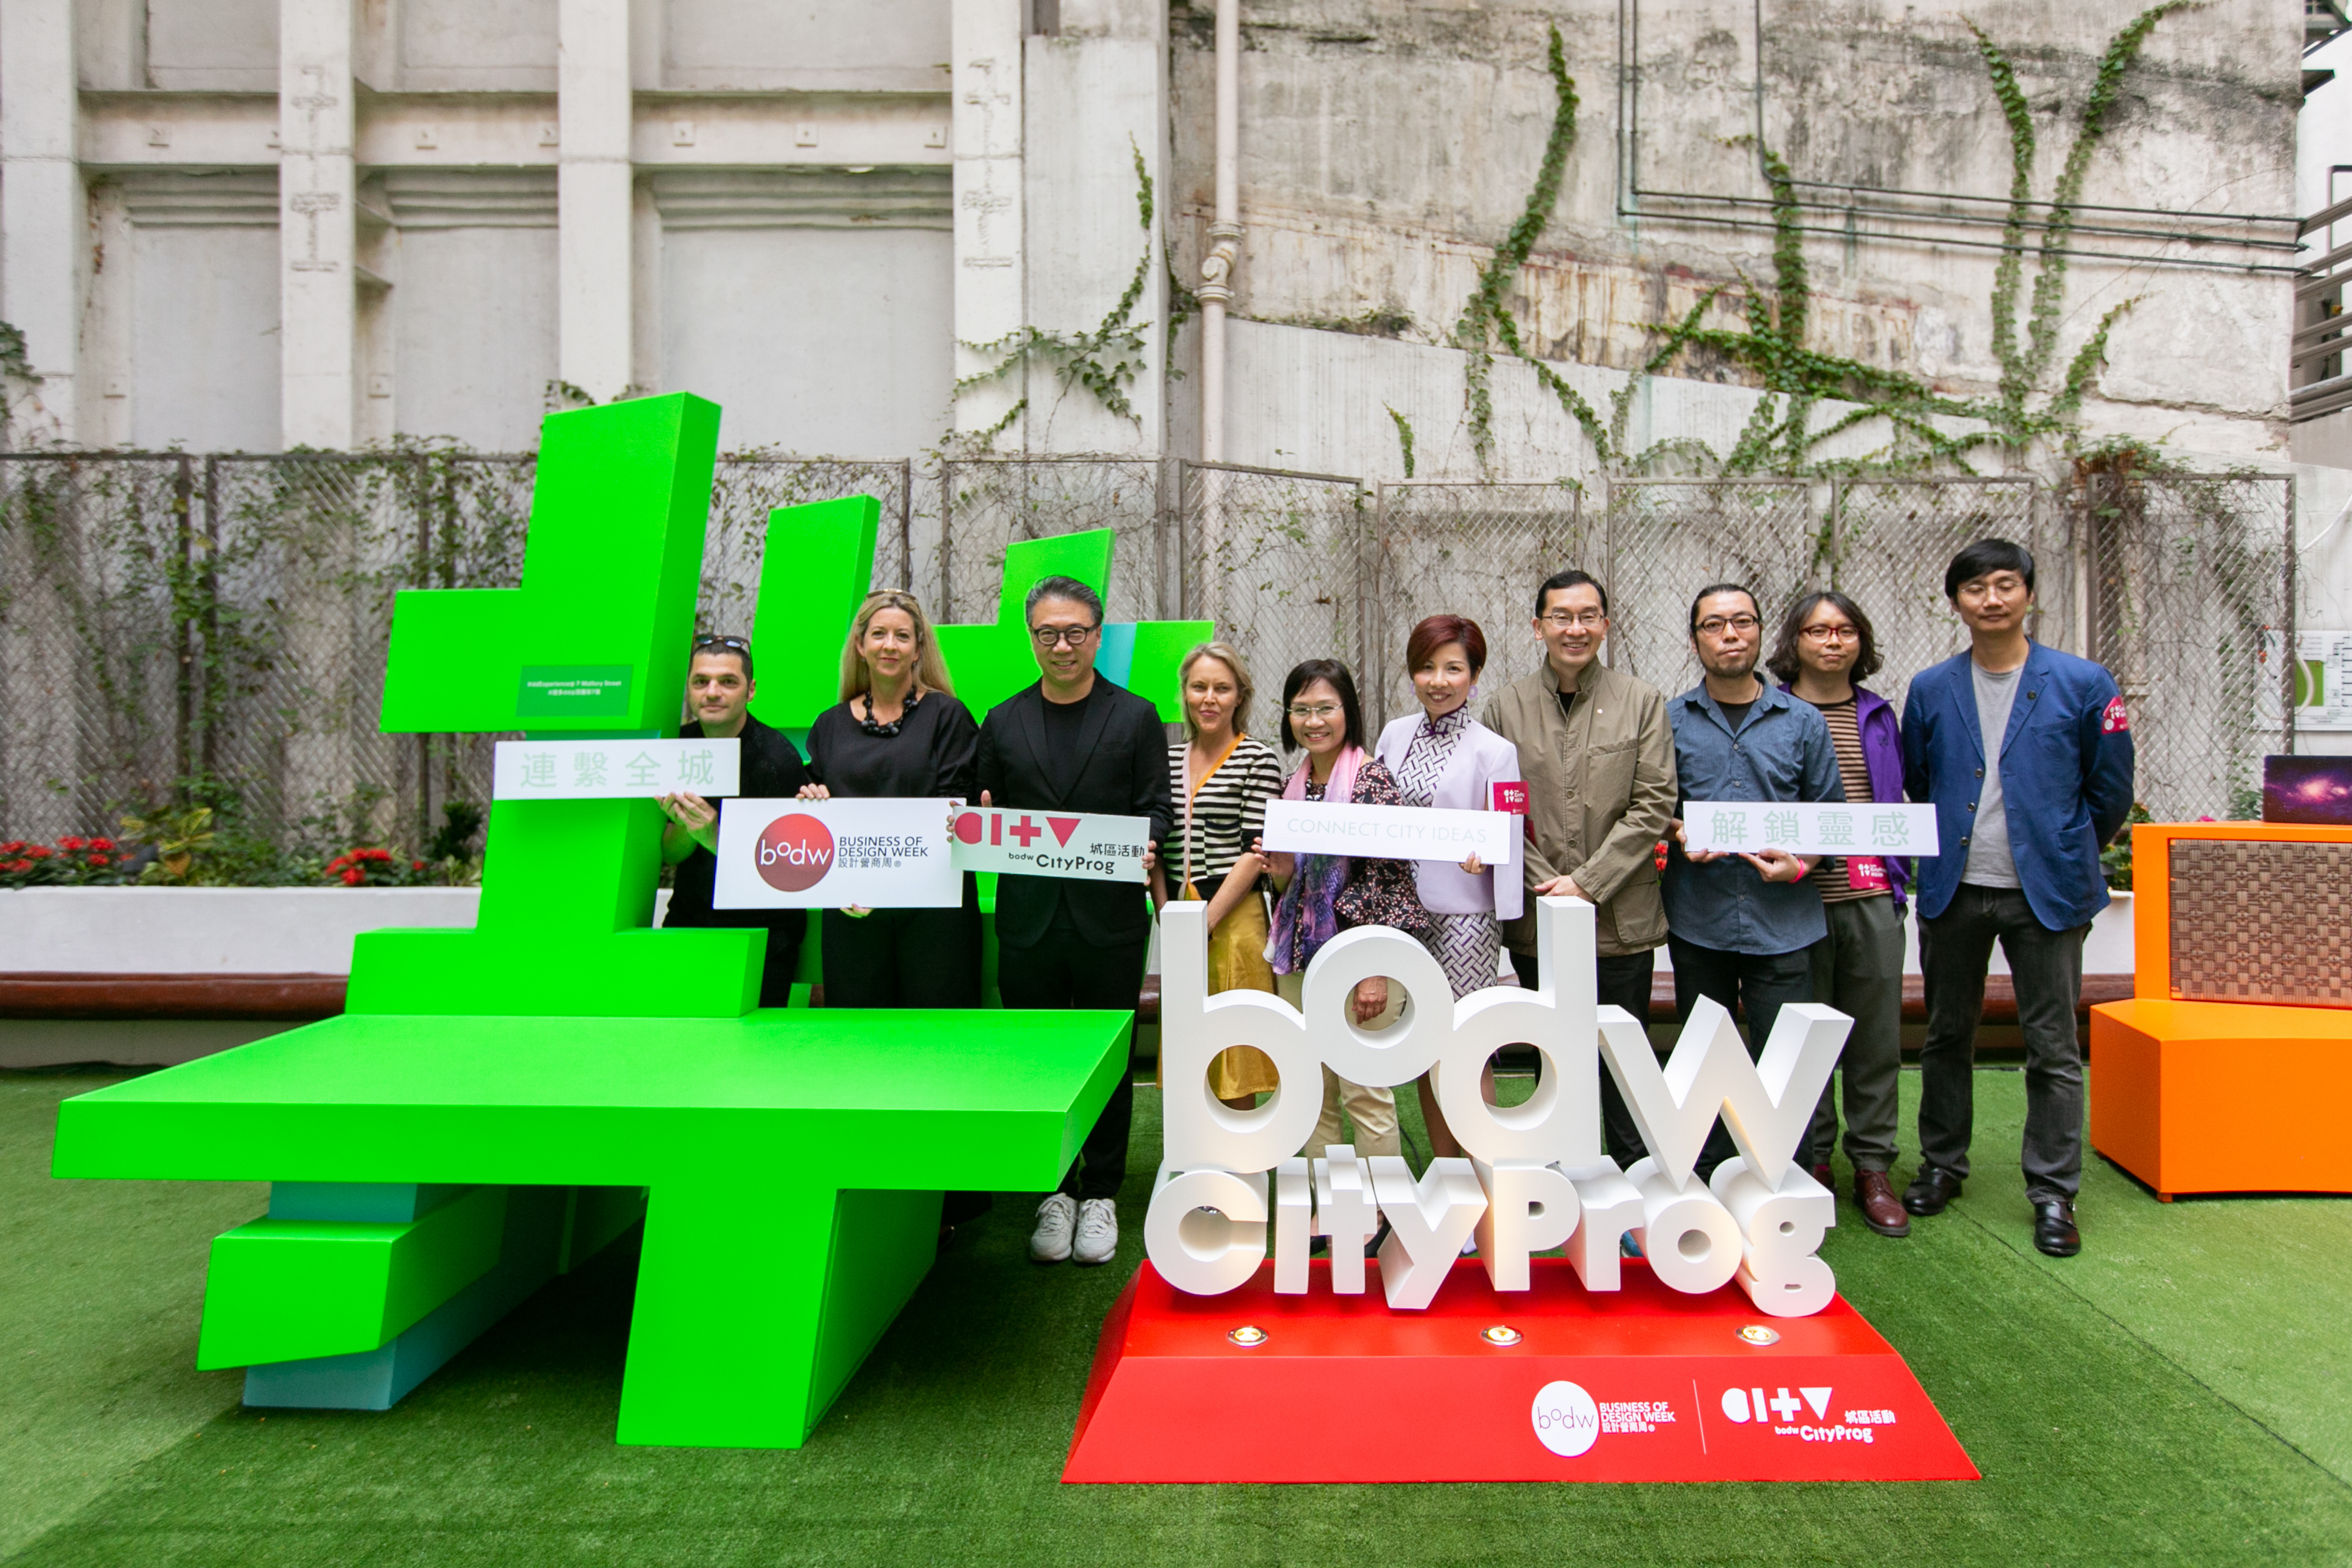 Hong Kong Design Centre Presents BODW City Programme, a Citywide Creative and Business Community Activation Programme